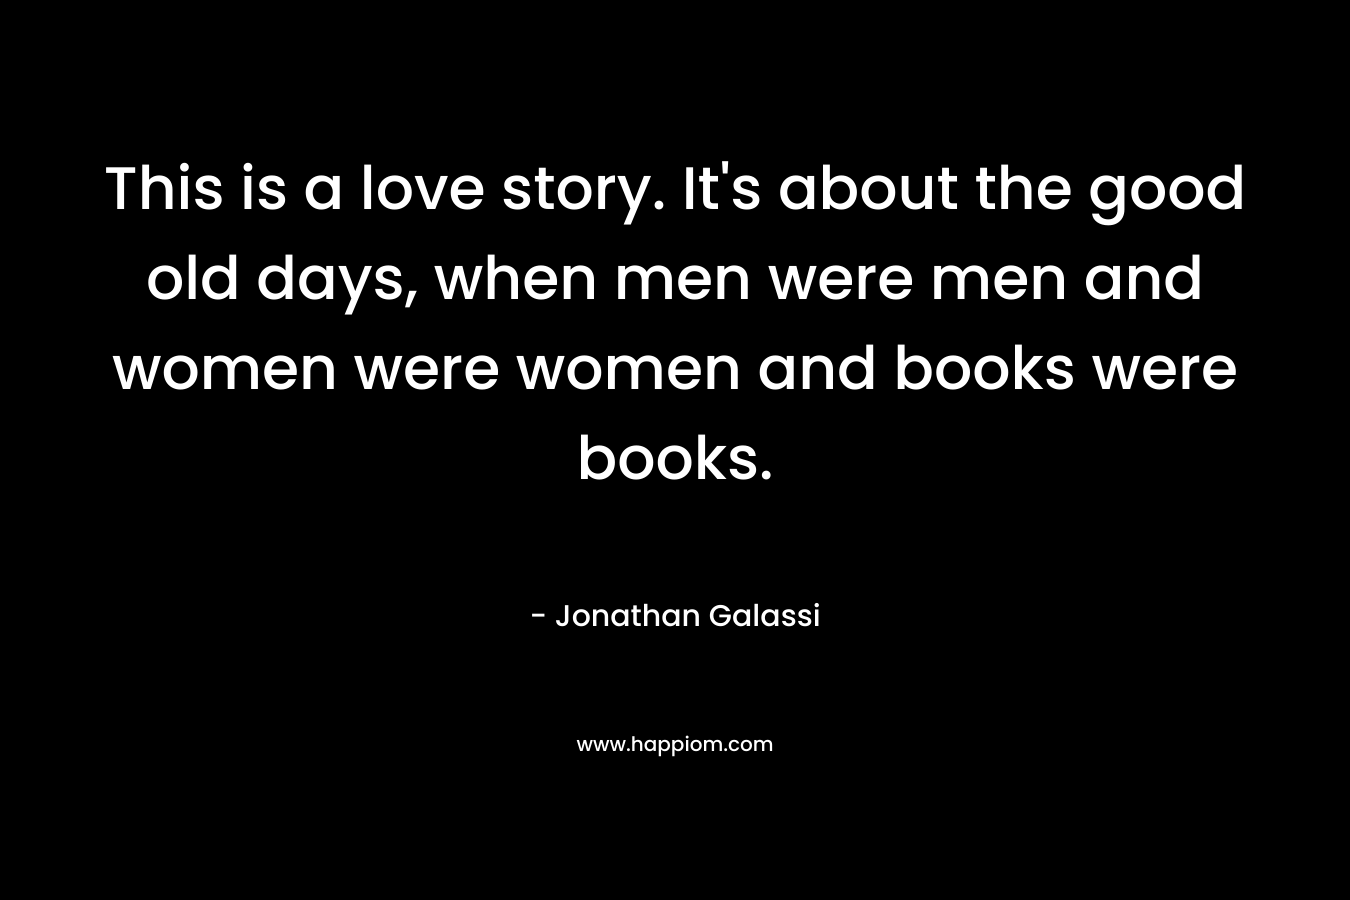 This is a love story. It's about the good old days, when men were men and women were women and books were books.